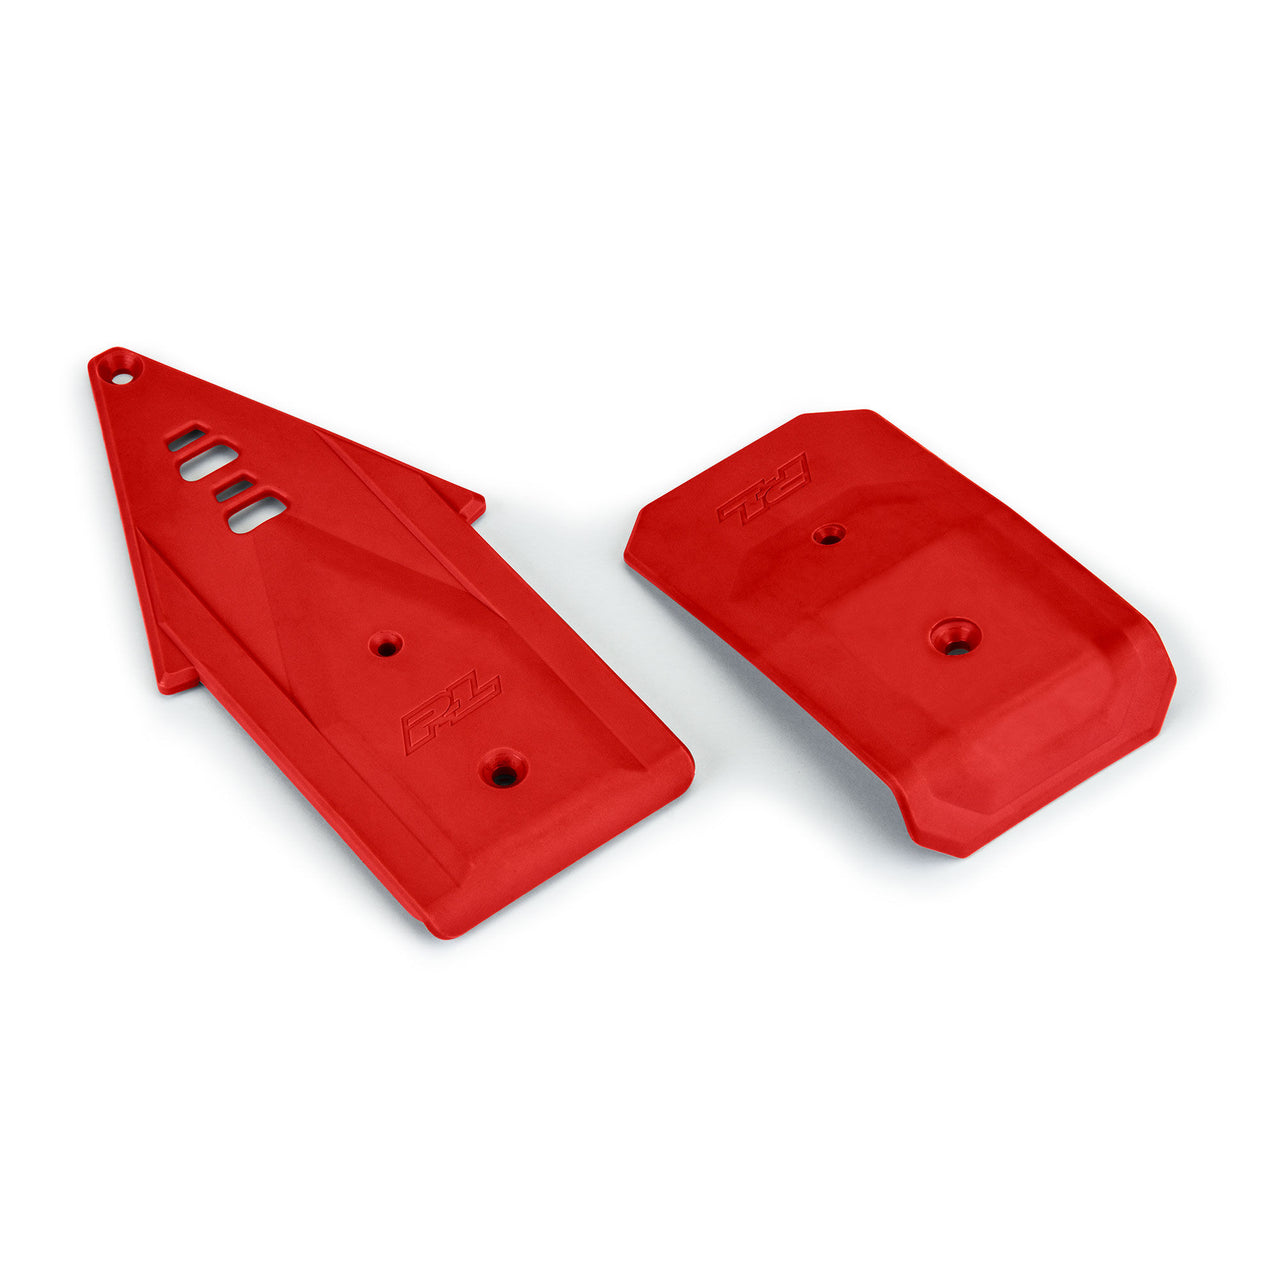 PRO639507 Bash Armor Front/Rear Skid Plates (Red) for ARRMA 3S Vehicles